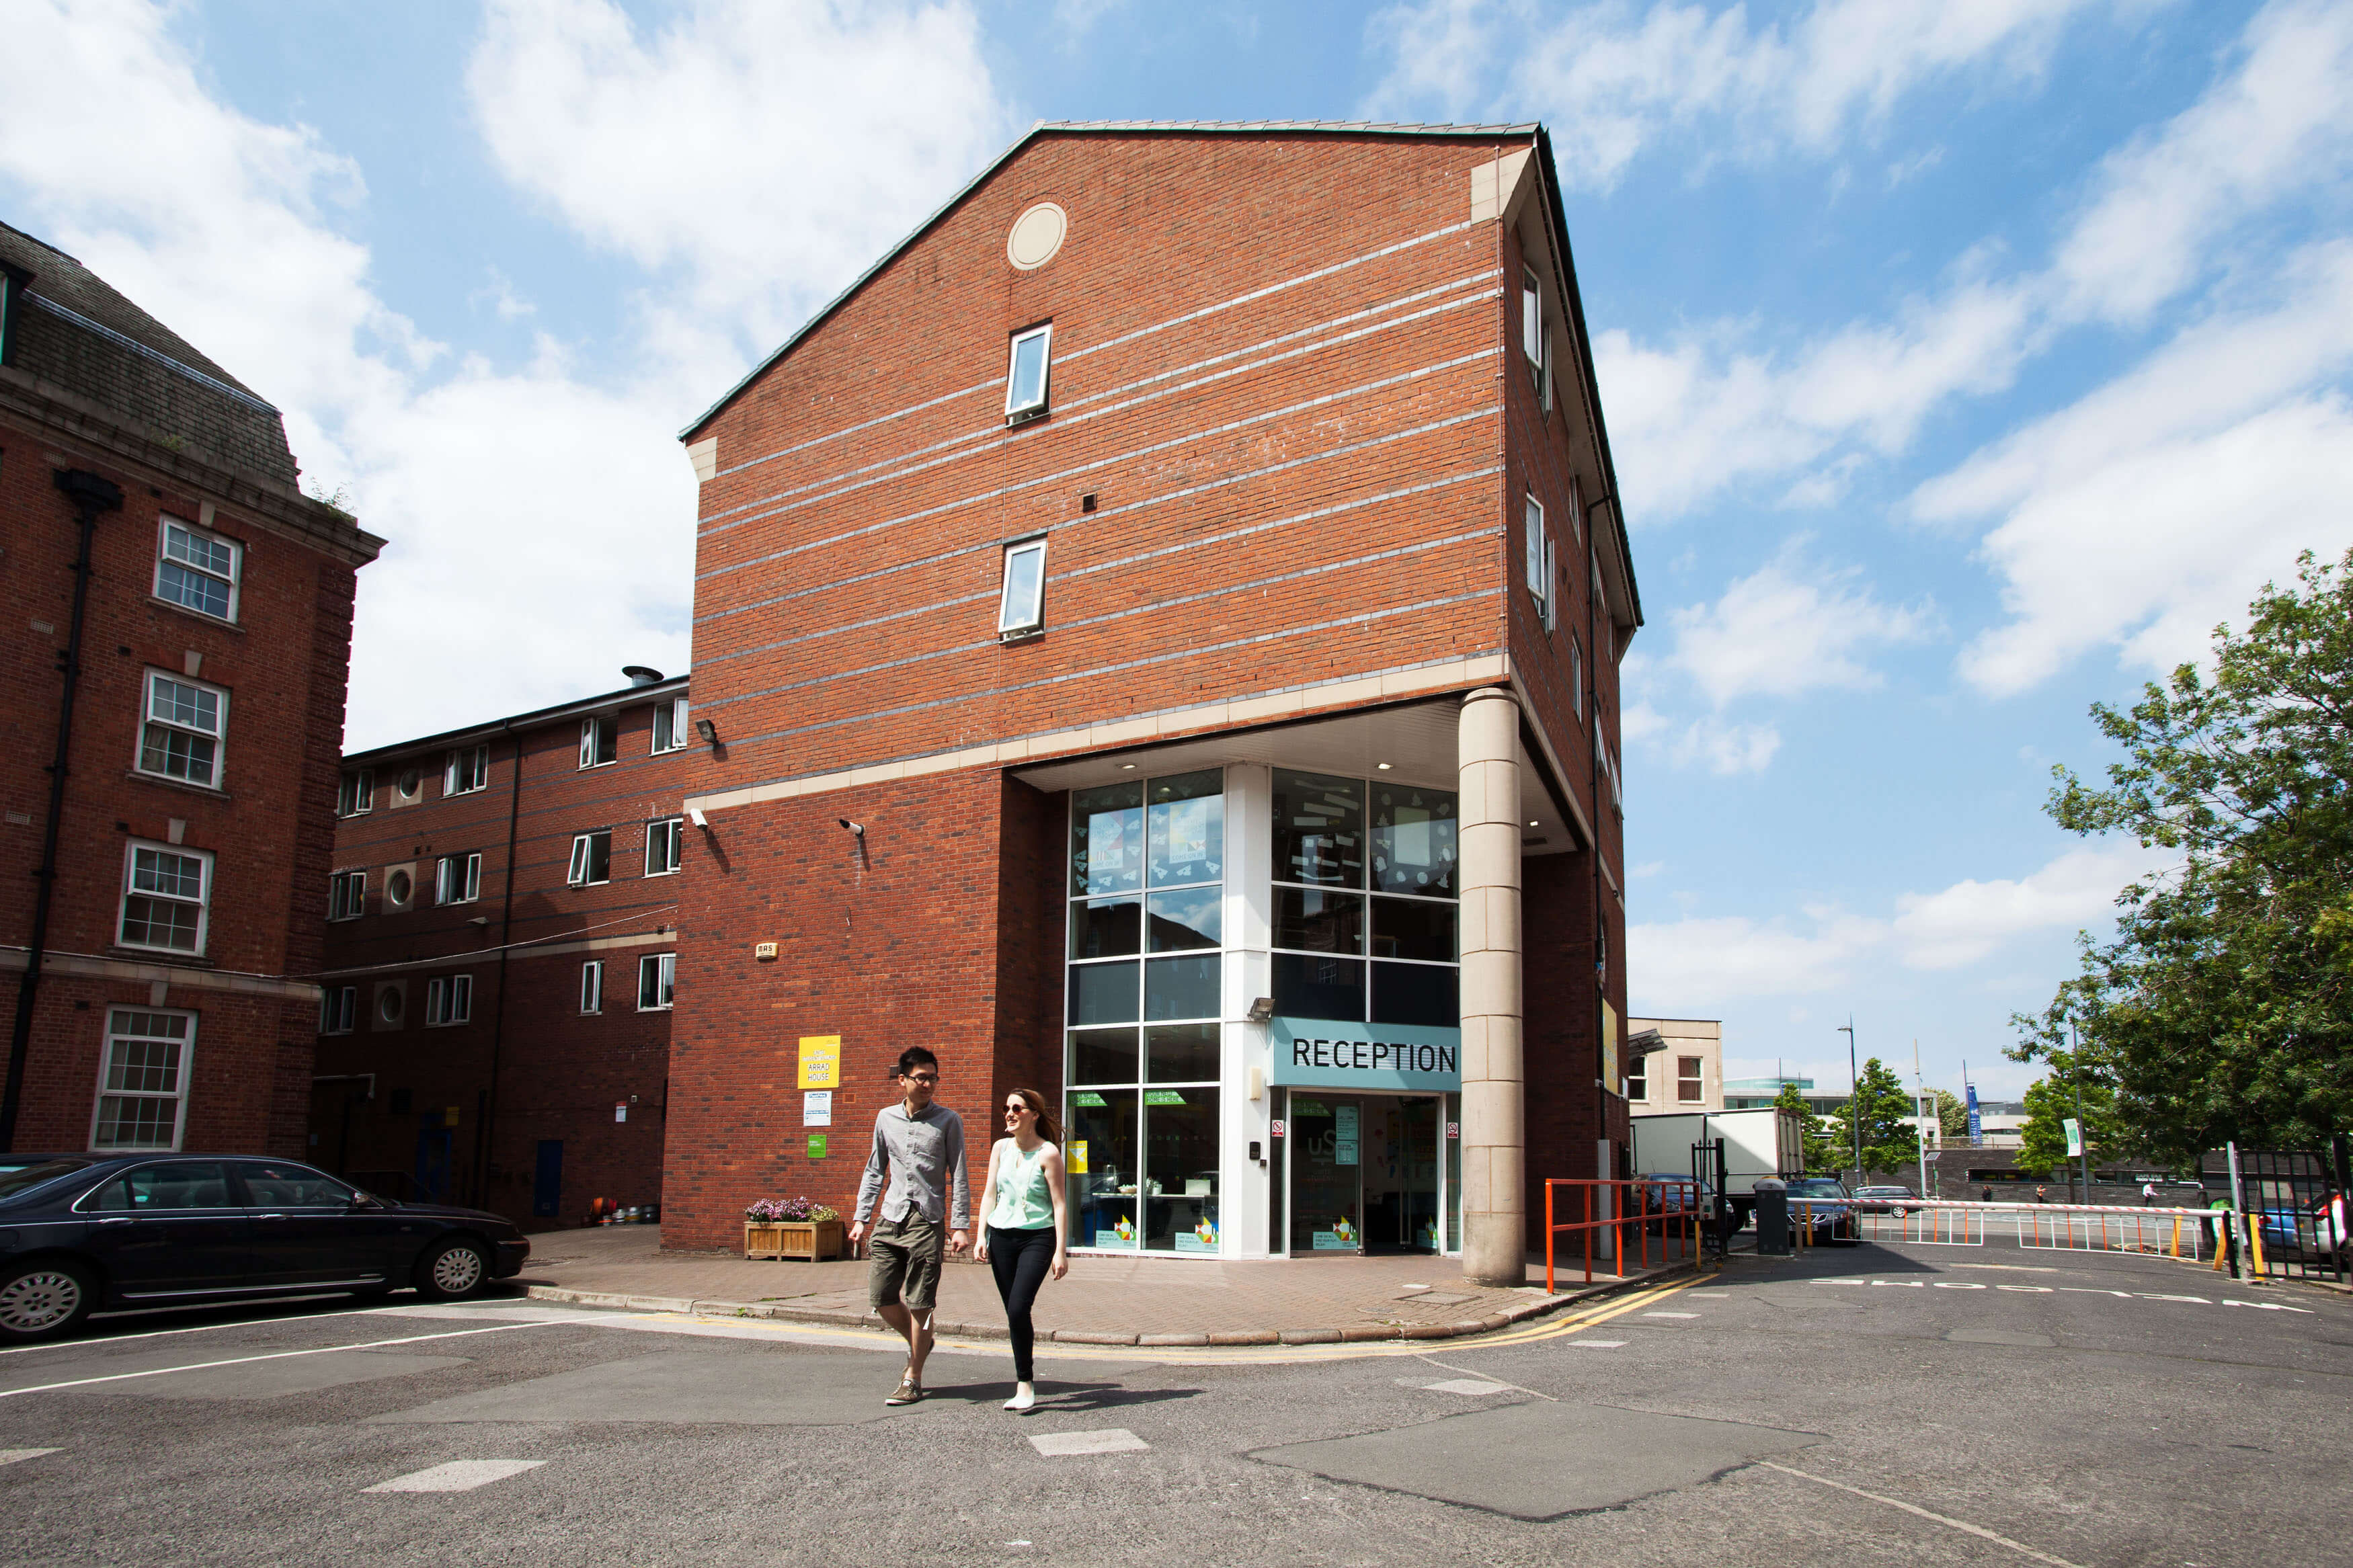 Unite Students accommodation at Arrad House in Liverpool